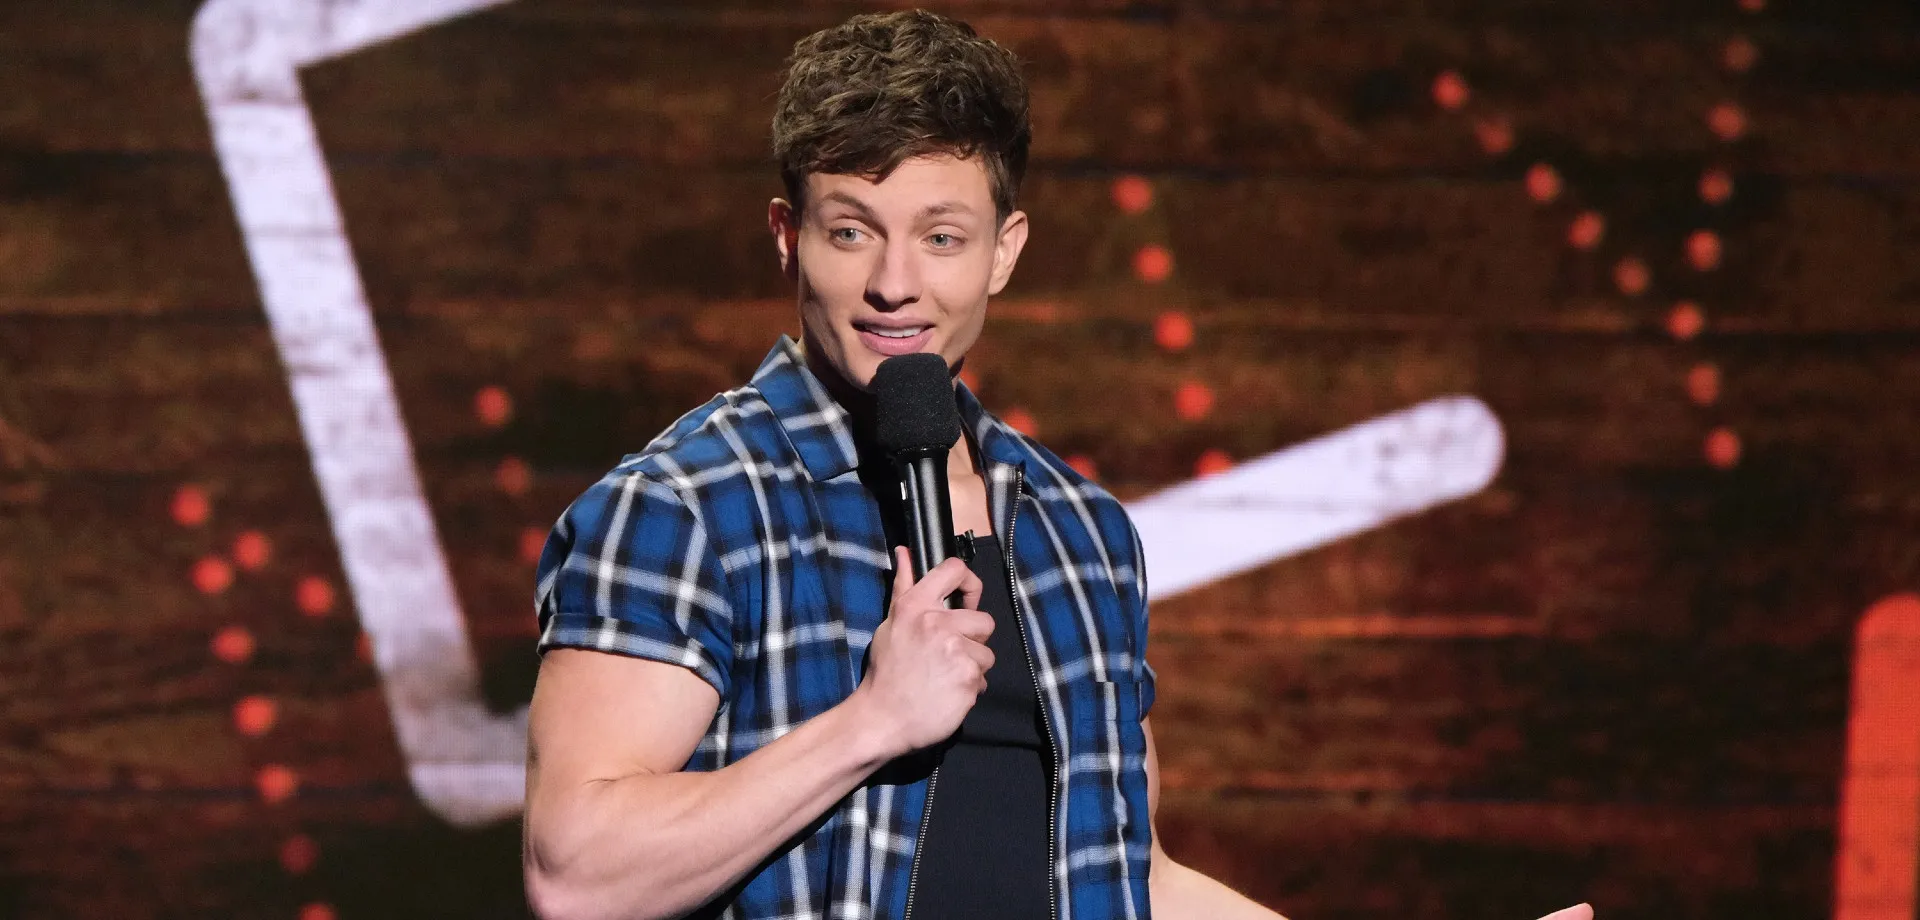 Who Is Matt Rife? Age, Bio, Career And More Of The Standup Comedian